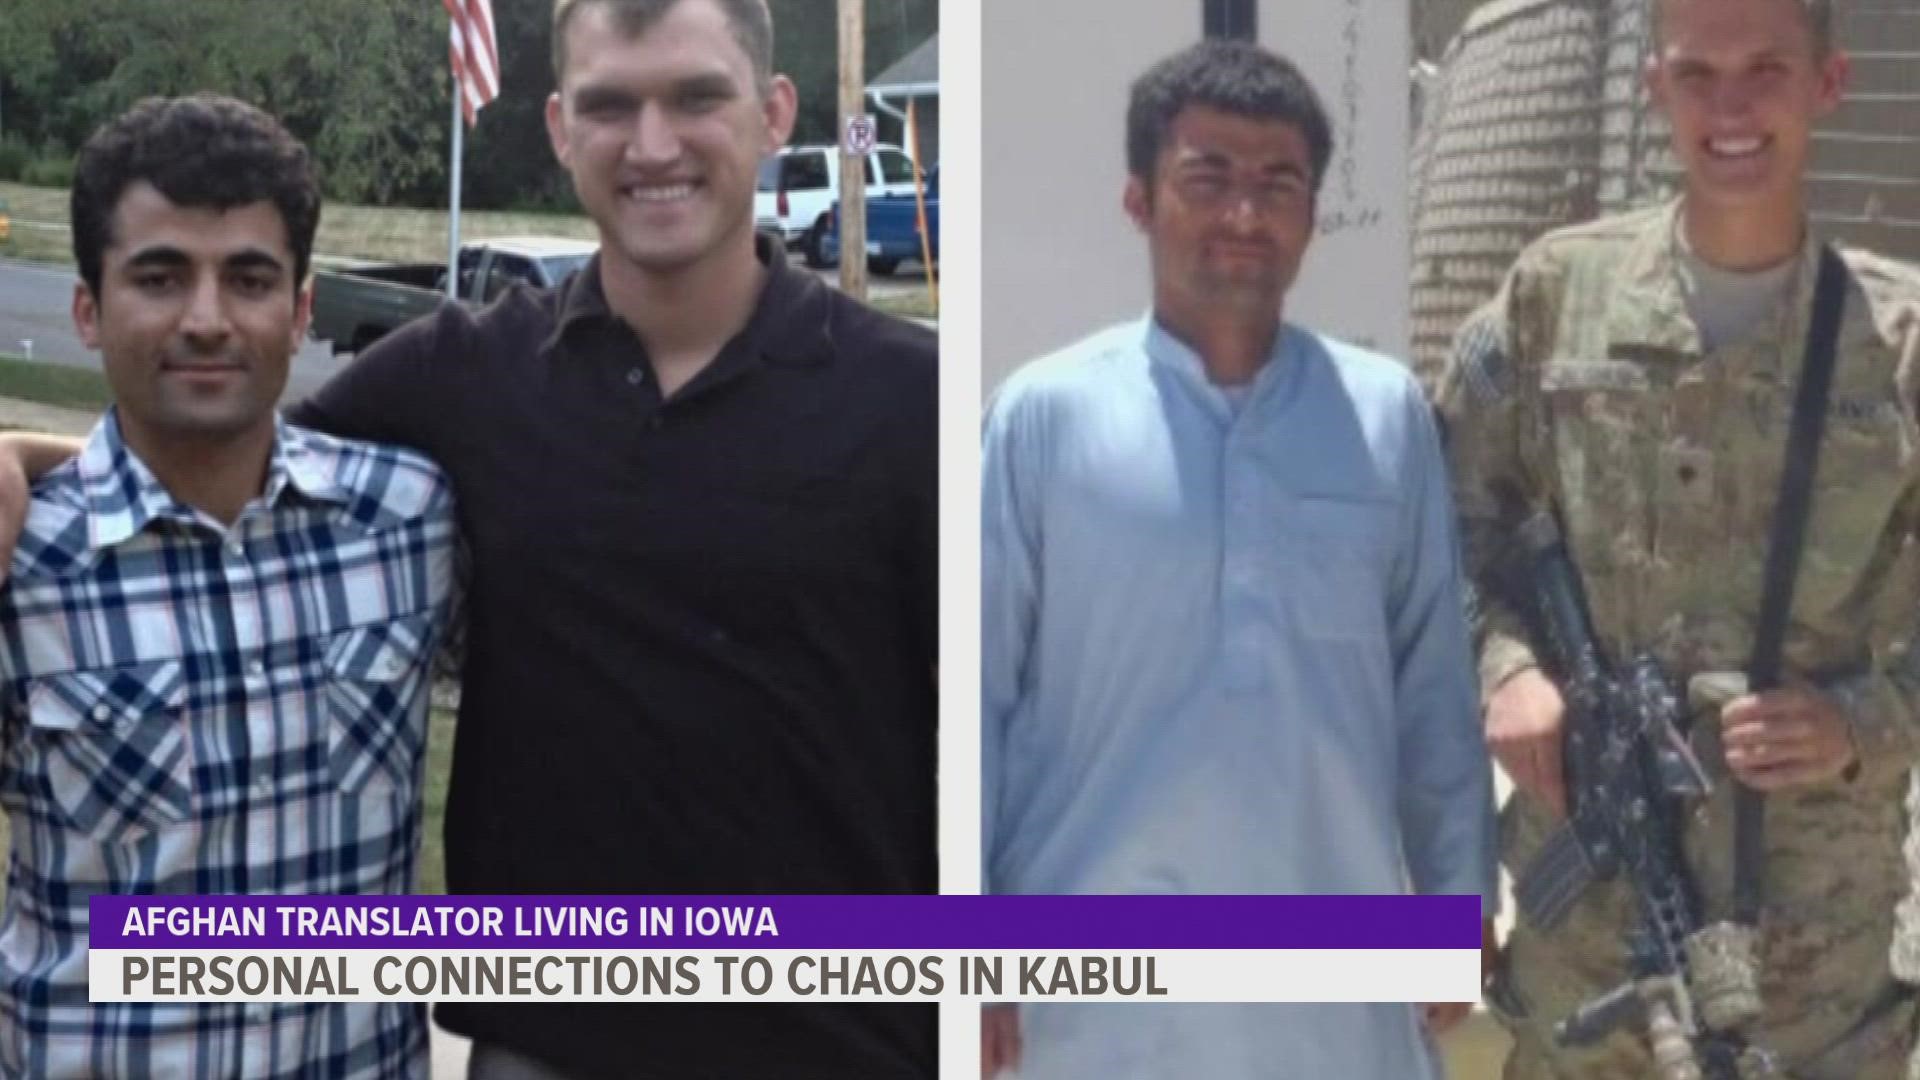 Nabi Mohammadi lives in Des Moines now, working for the Iowa National Guard.